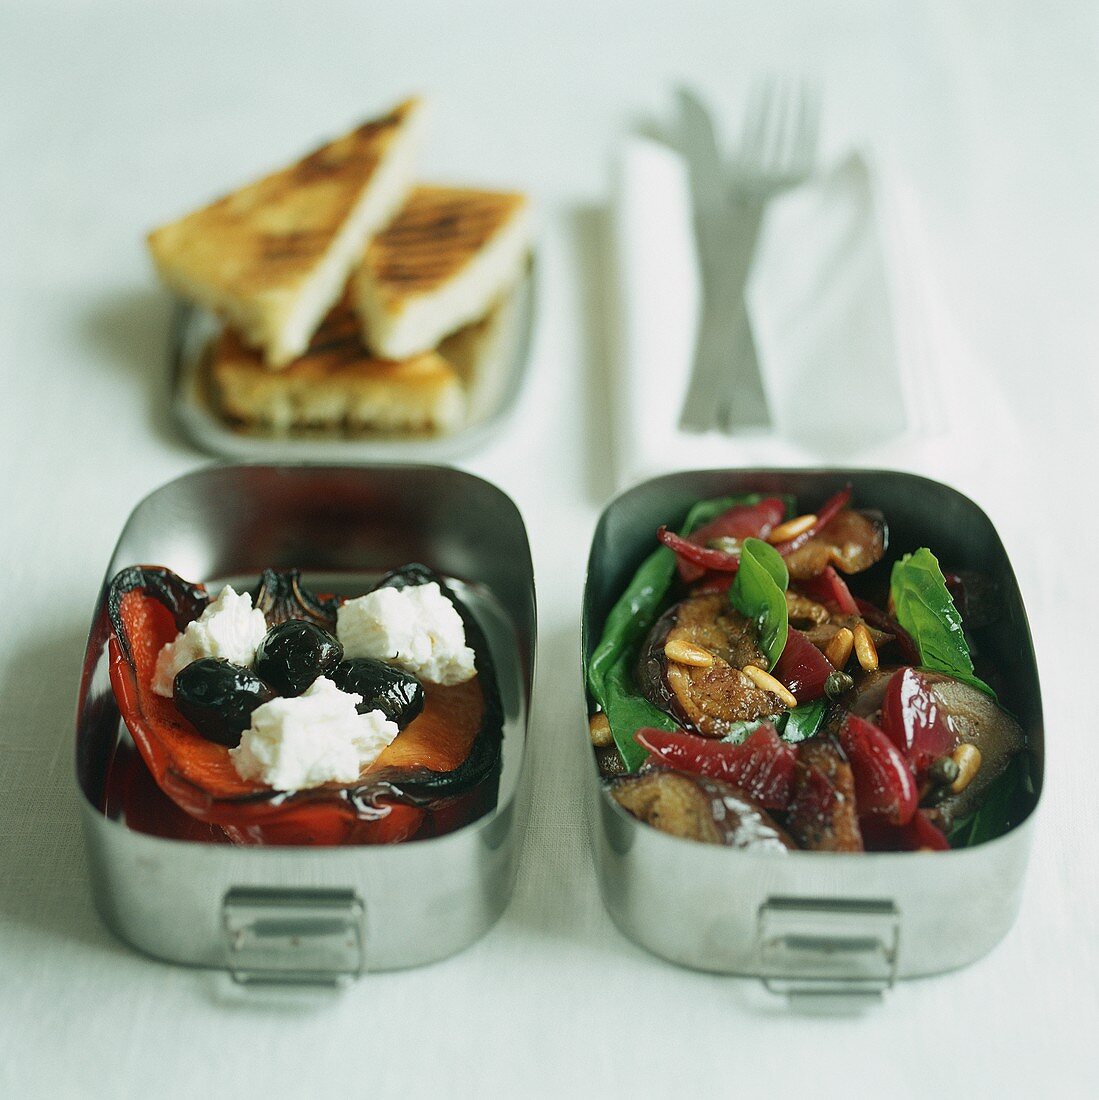 Two lunch boxes with grilled vegetables and feta